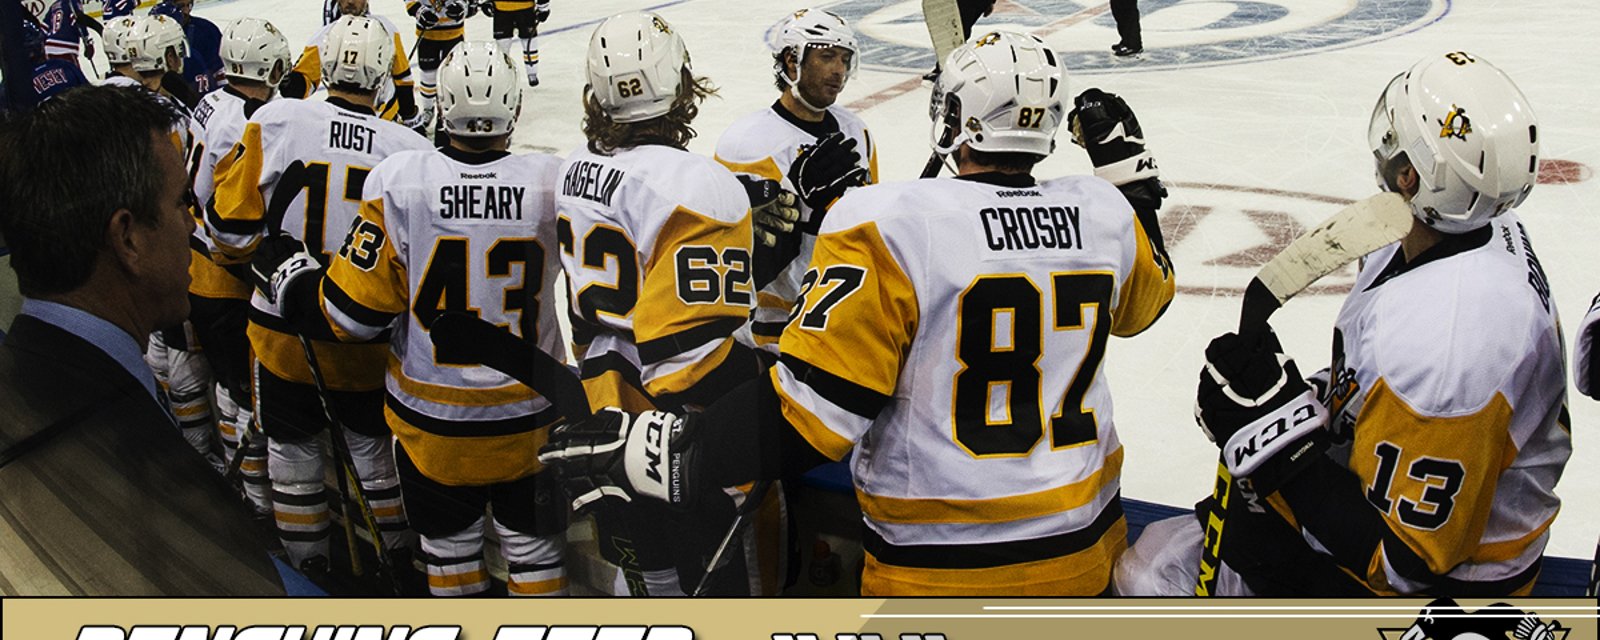 A key managerial asset is about to leave the Pittsburgh Penguins.